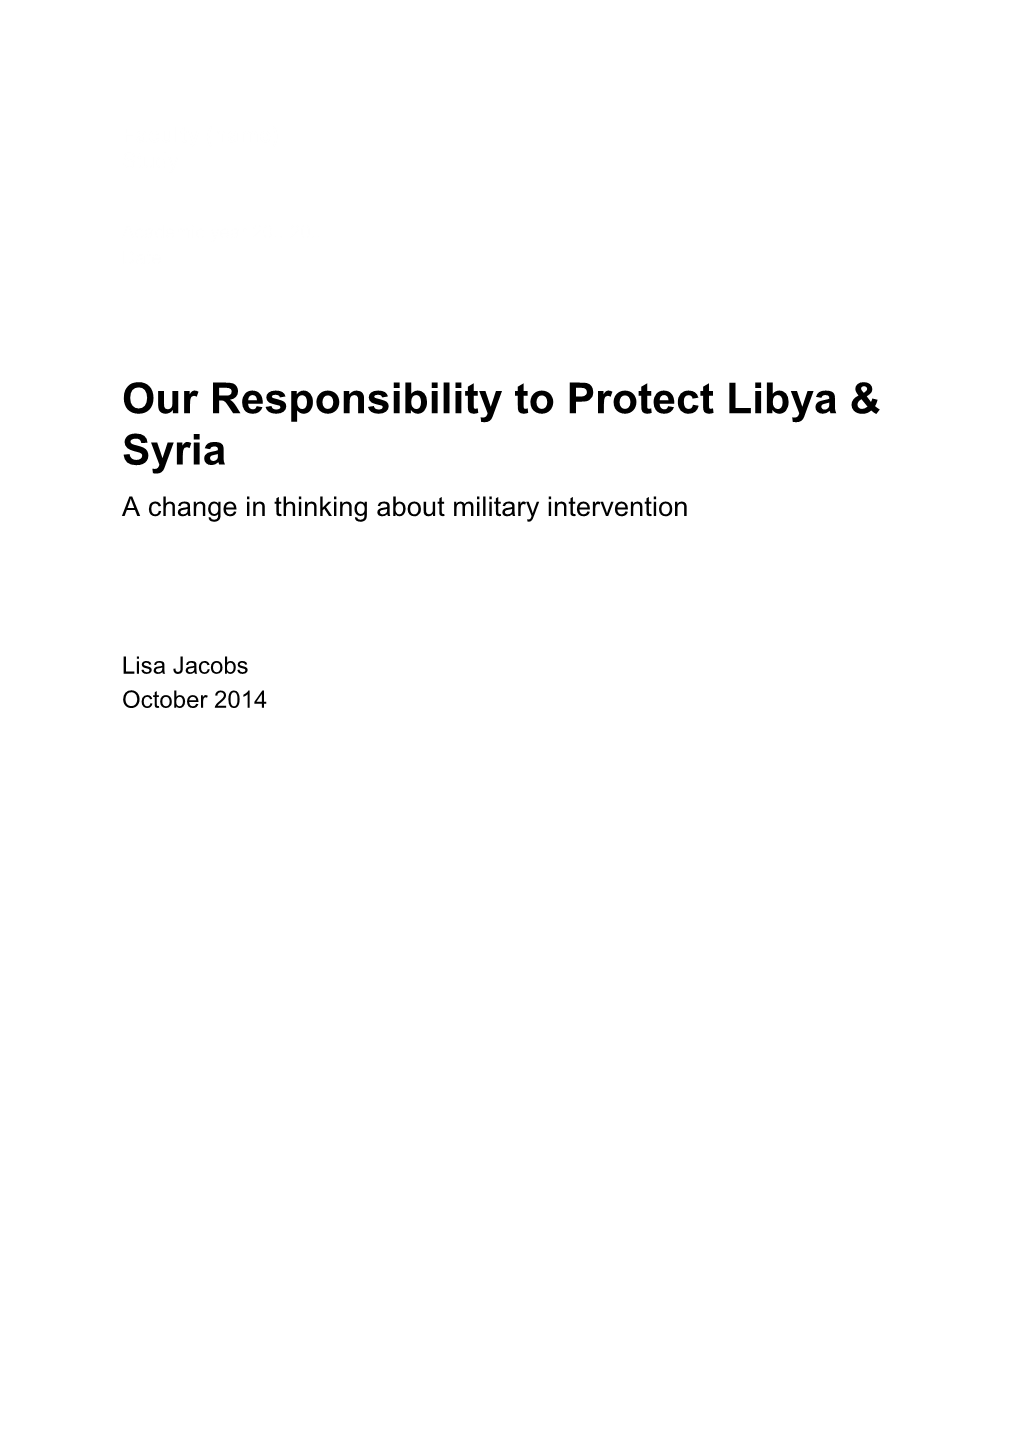 Our Responsibility to Protect Libya & Syria